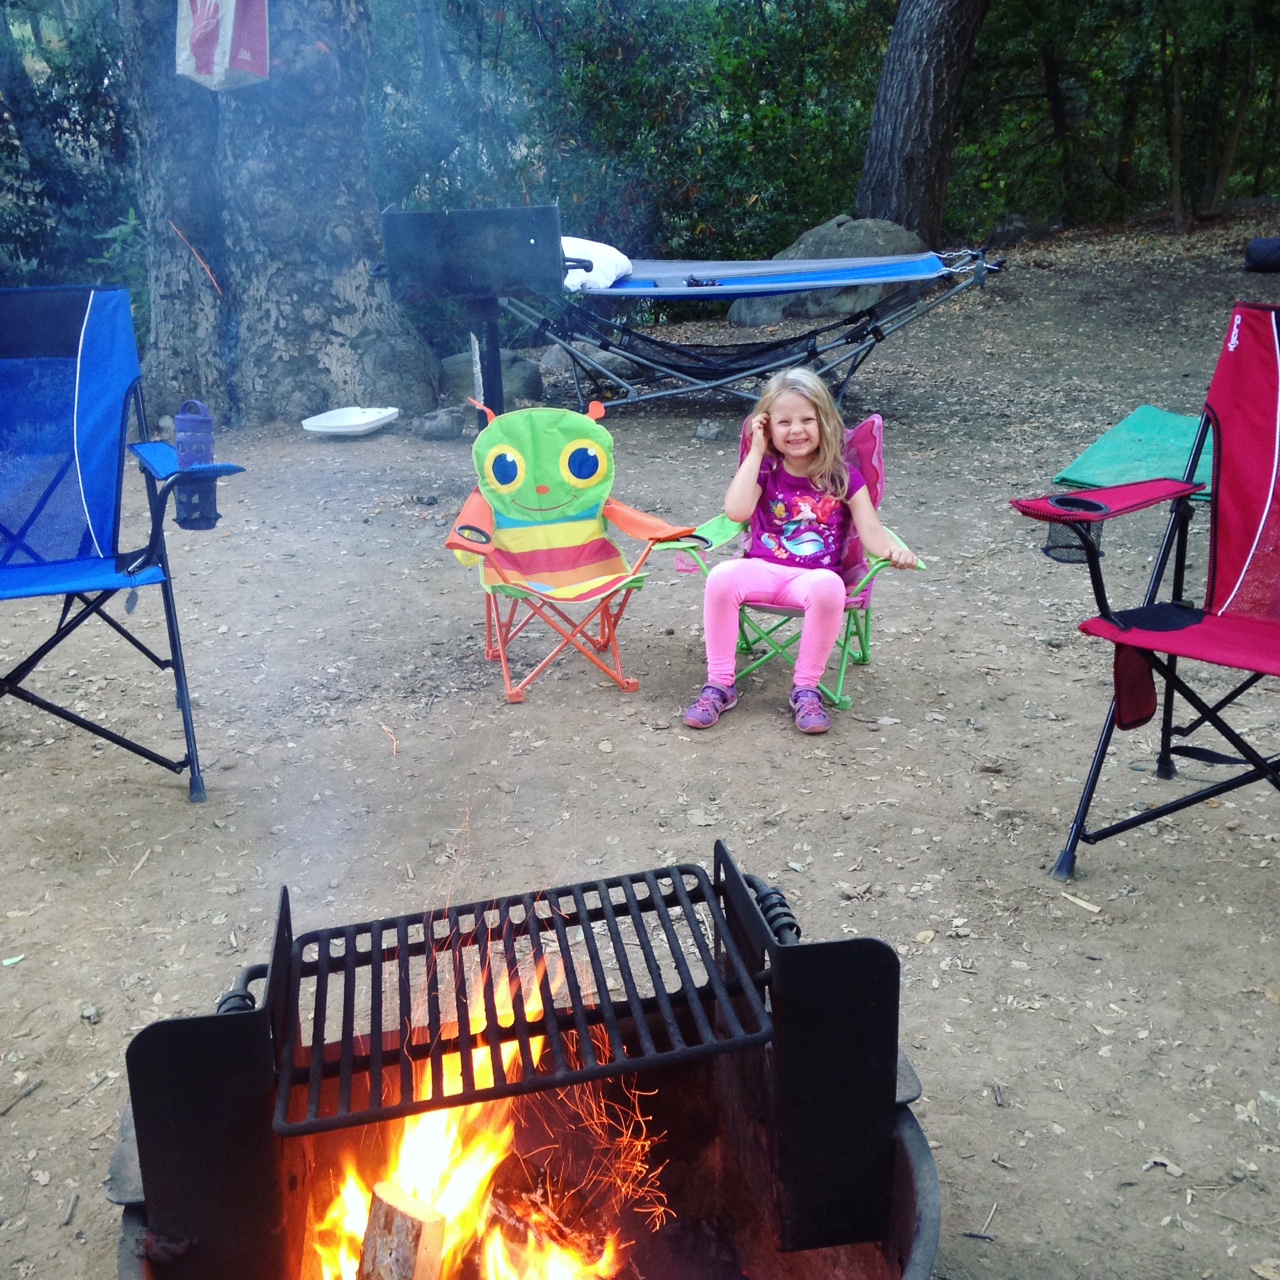 5 Reasons Why Every L.A. Kid Needs To Go Camping